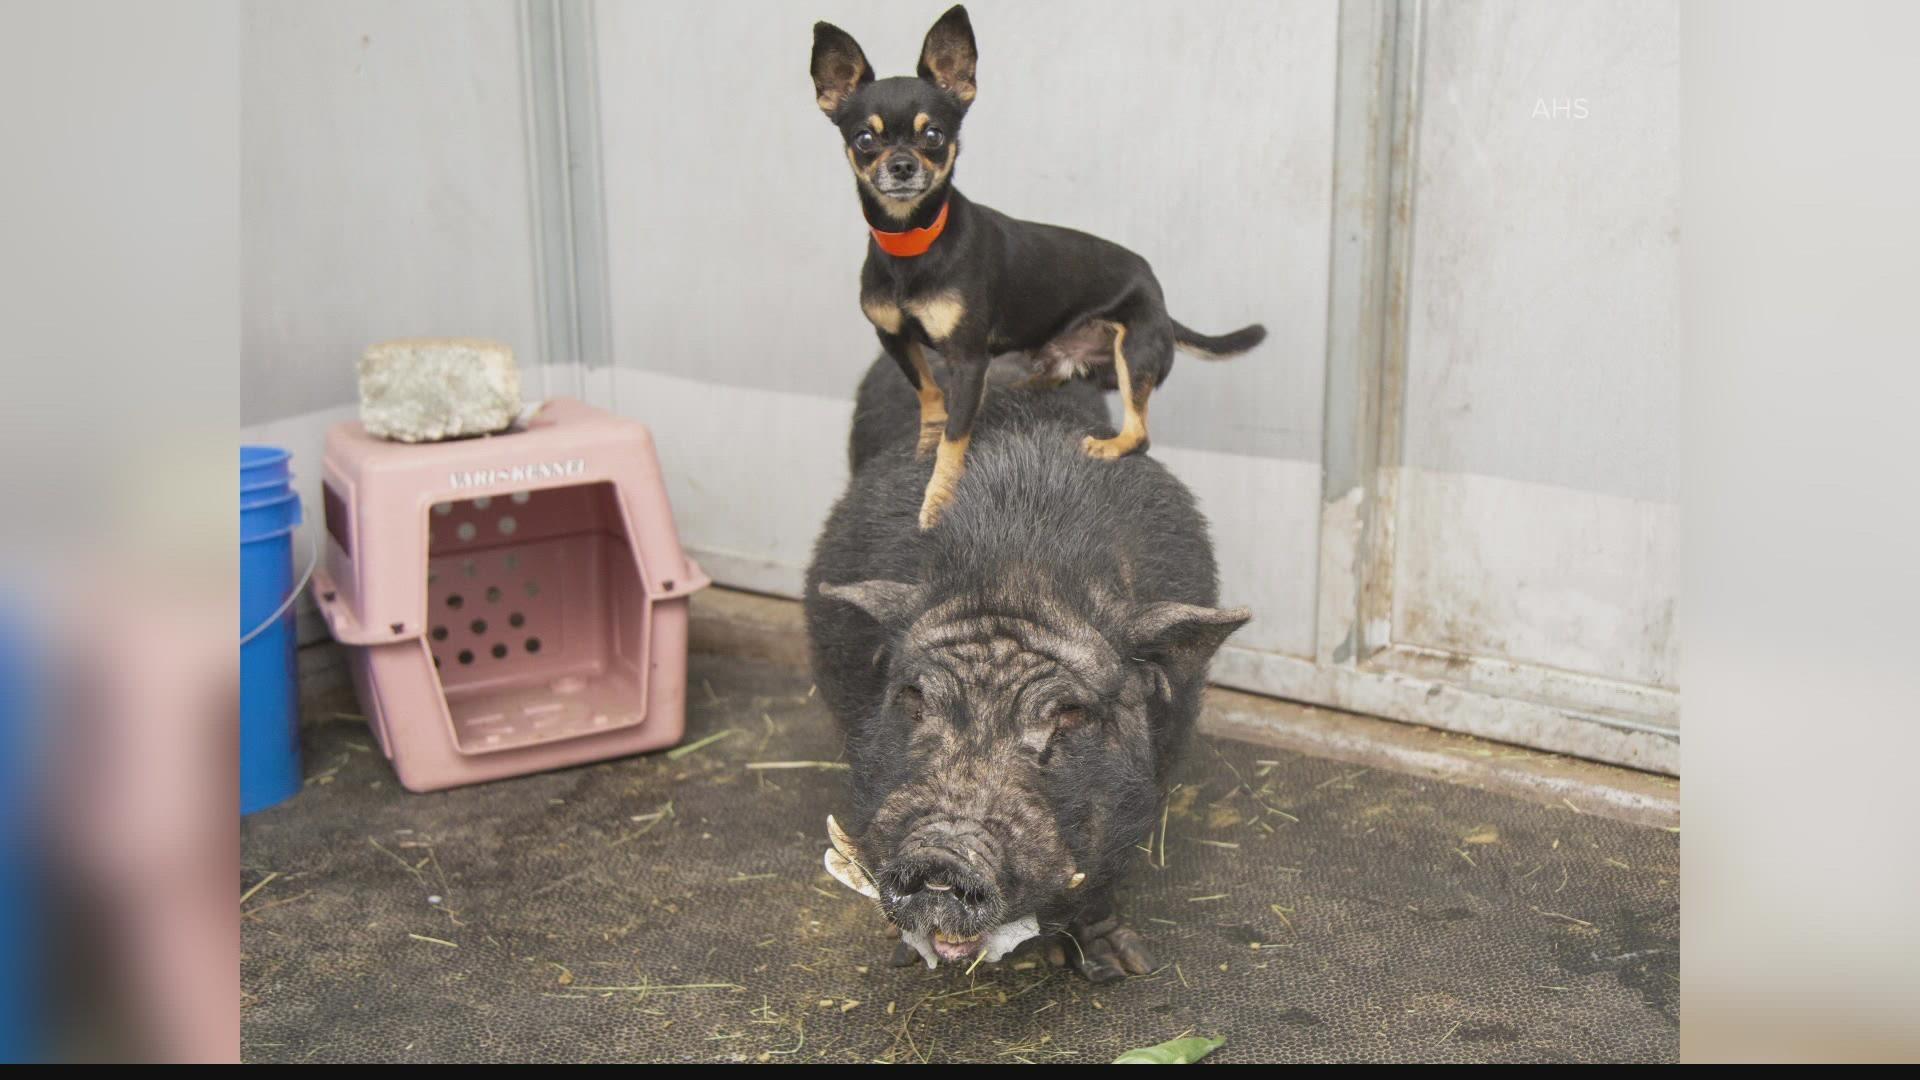 Similar to Timon and Pumbaa from the movie "The Lion King," this tiny chihuahua and plump pig from the Arizona Humane Society are the cutest besties.